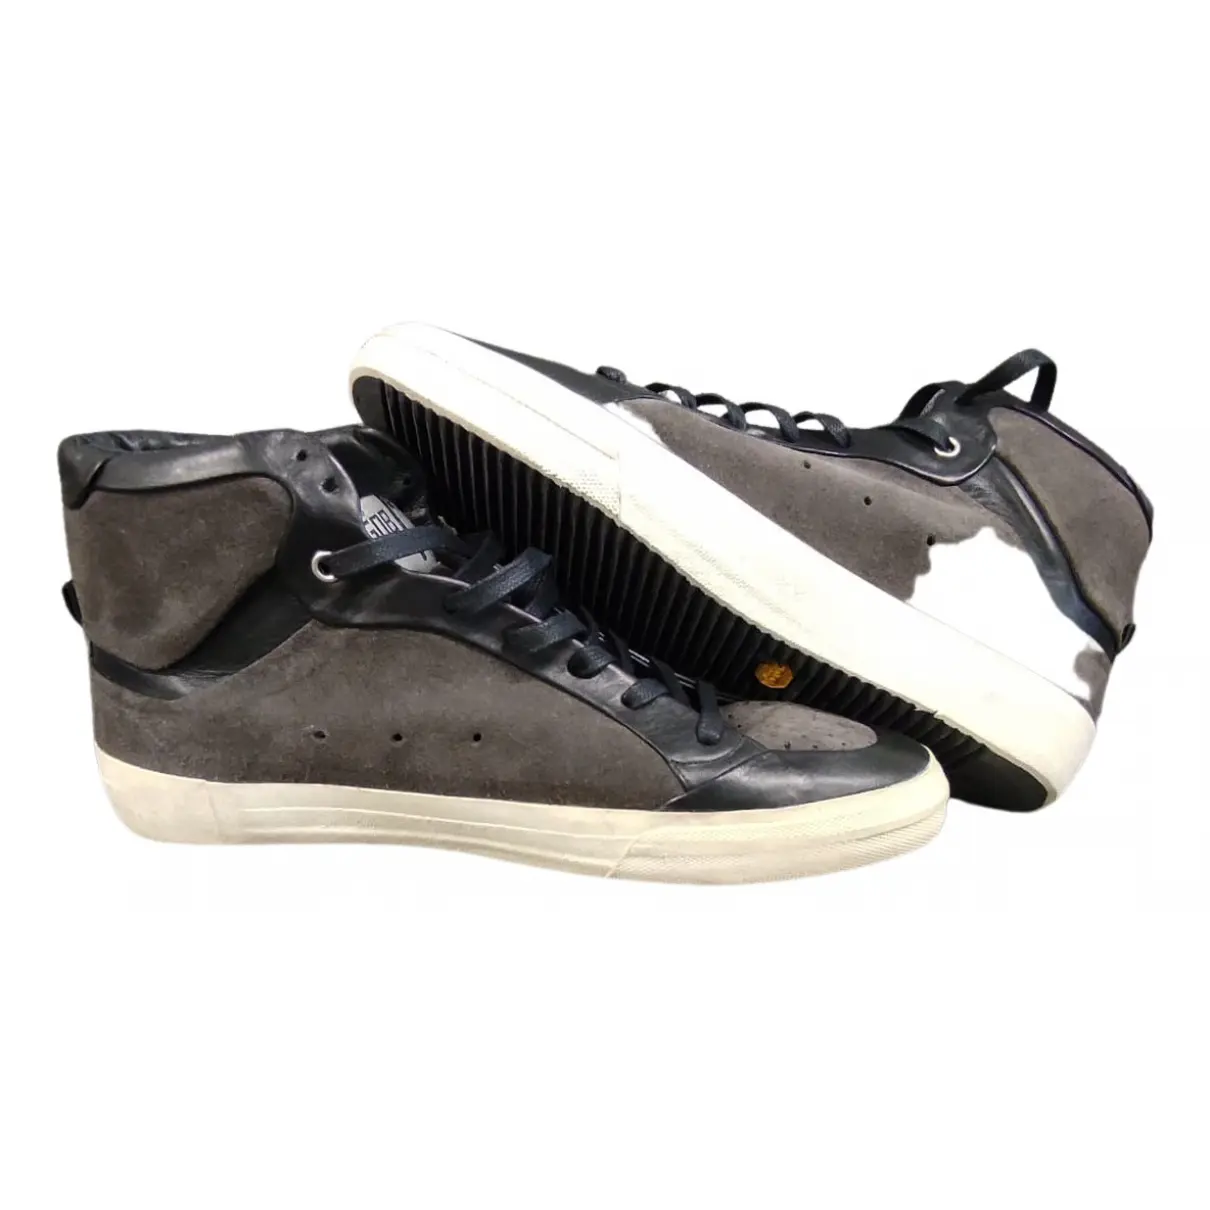 2.12 leather high trainers Golden Goose